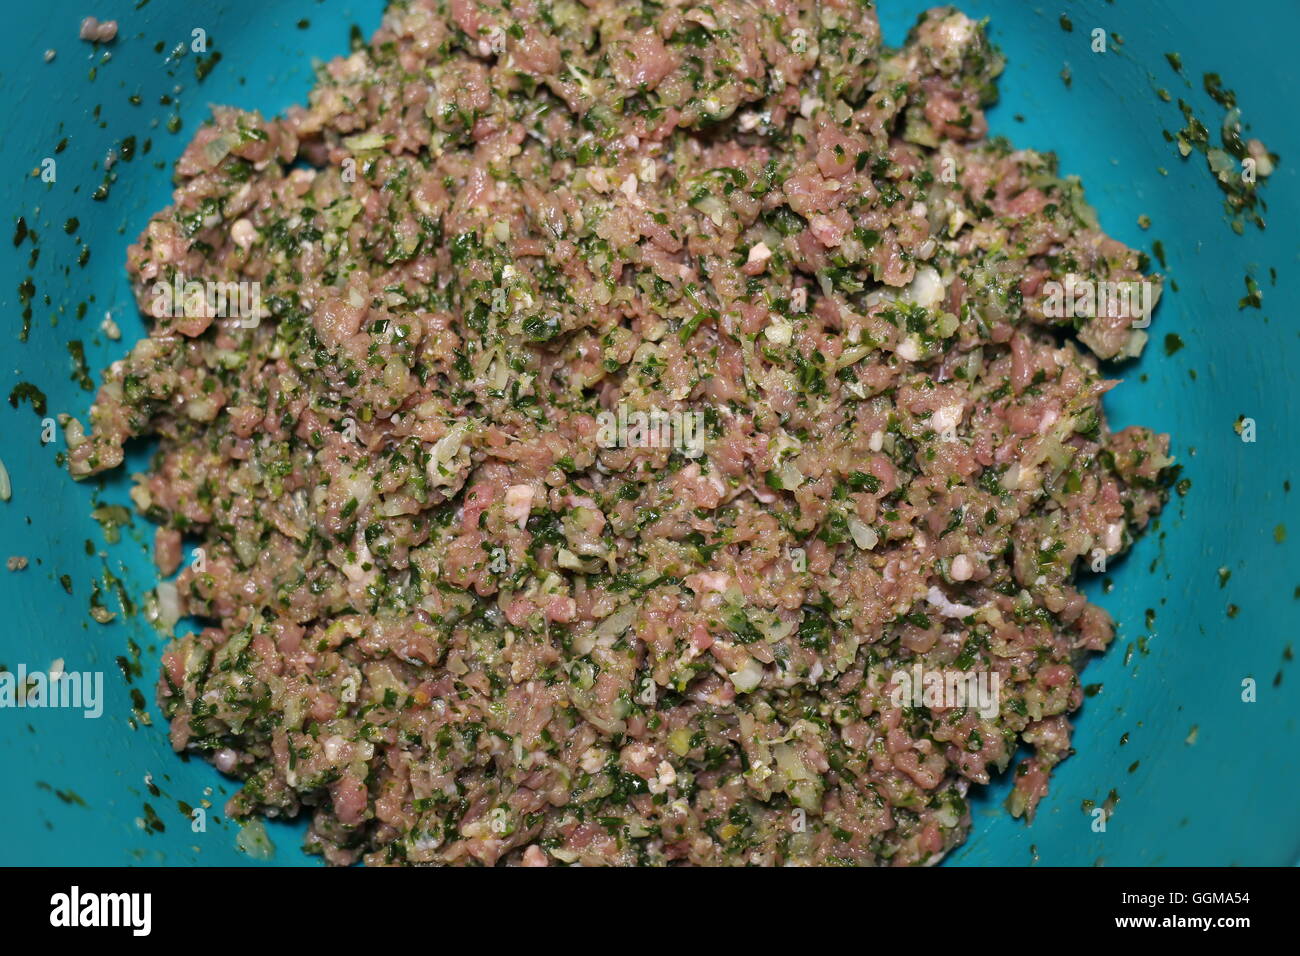 Minced Meat Mix. Not for vegetarians: Raw minced beef meat mixed with spinach, onion and spices in a green plastic bowl for meatballs or hamburger Stock Photo